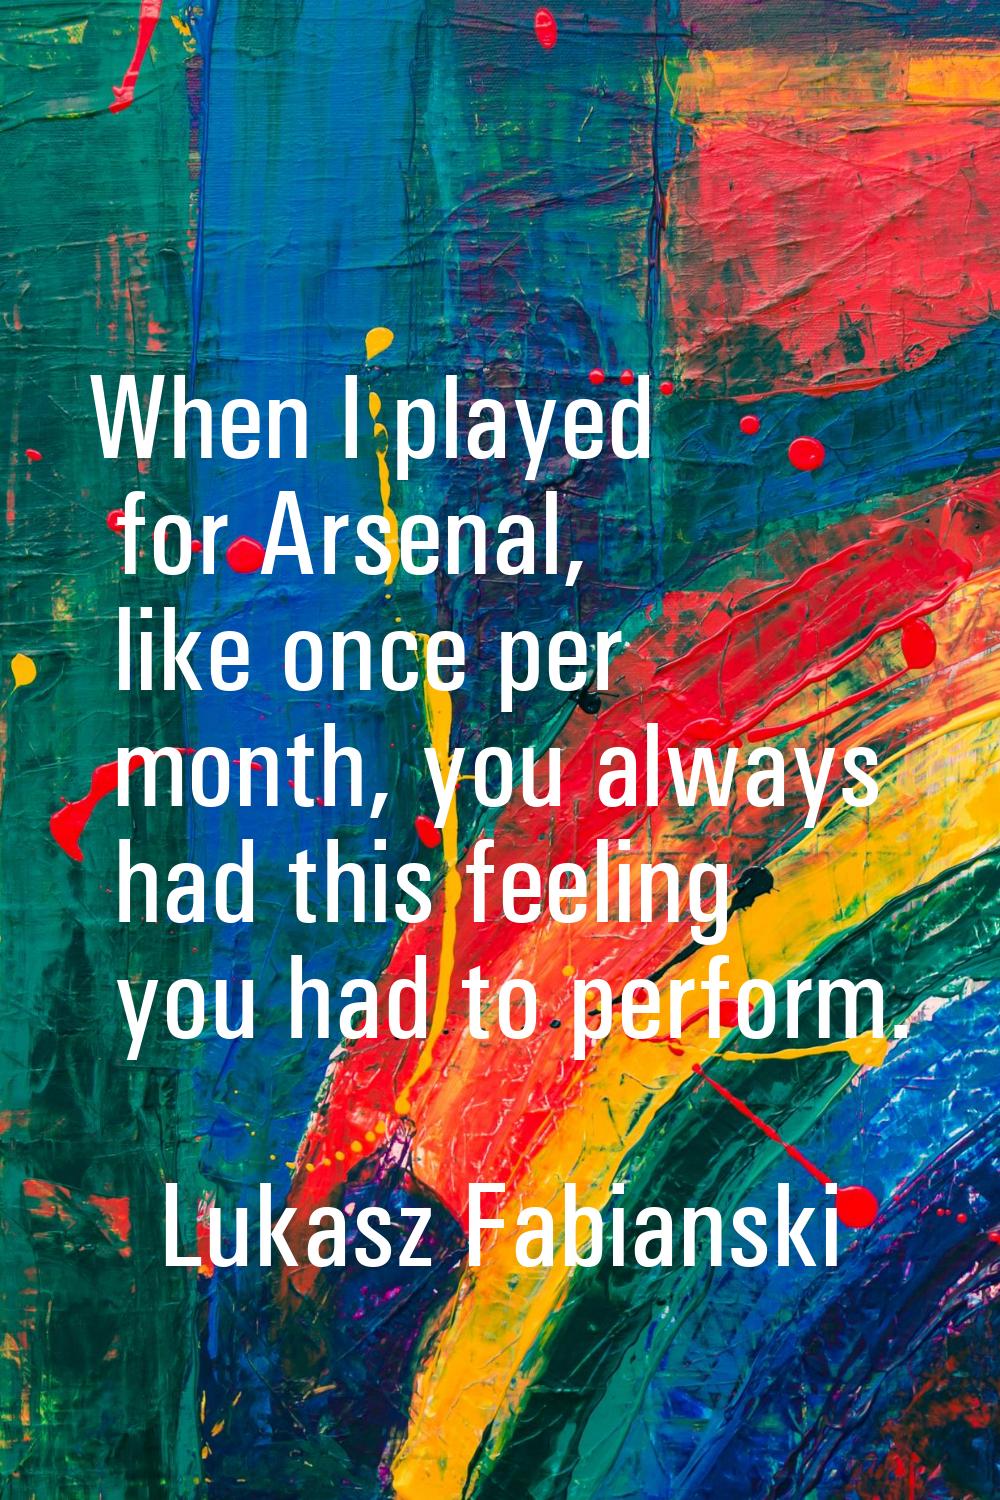 When I played for Arsenal, like once per month, you always had this feeling you had to perform.